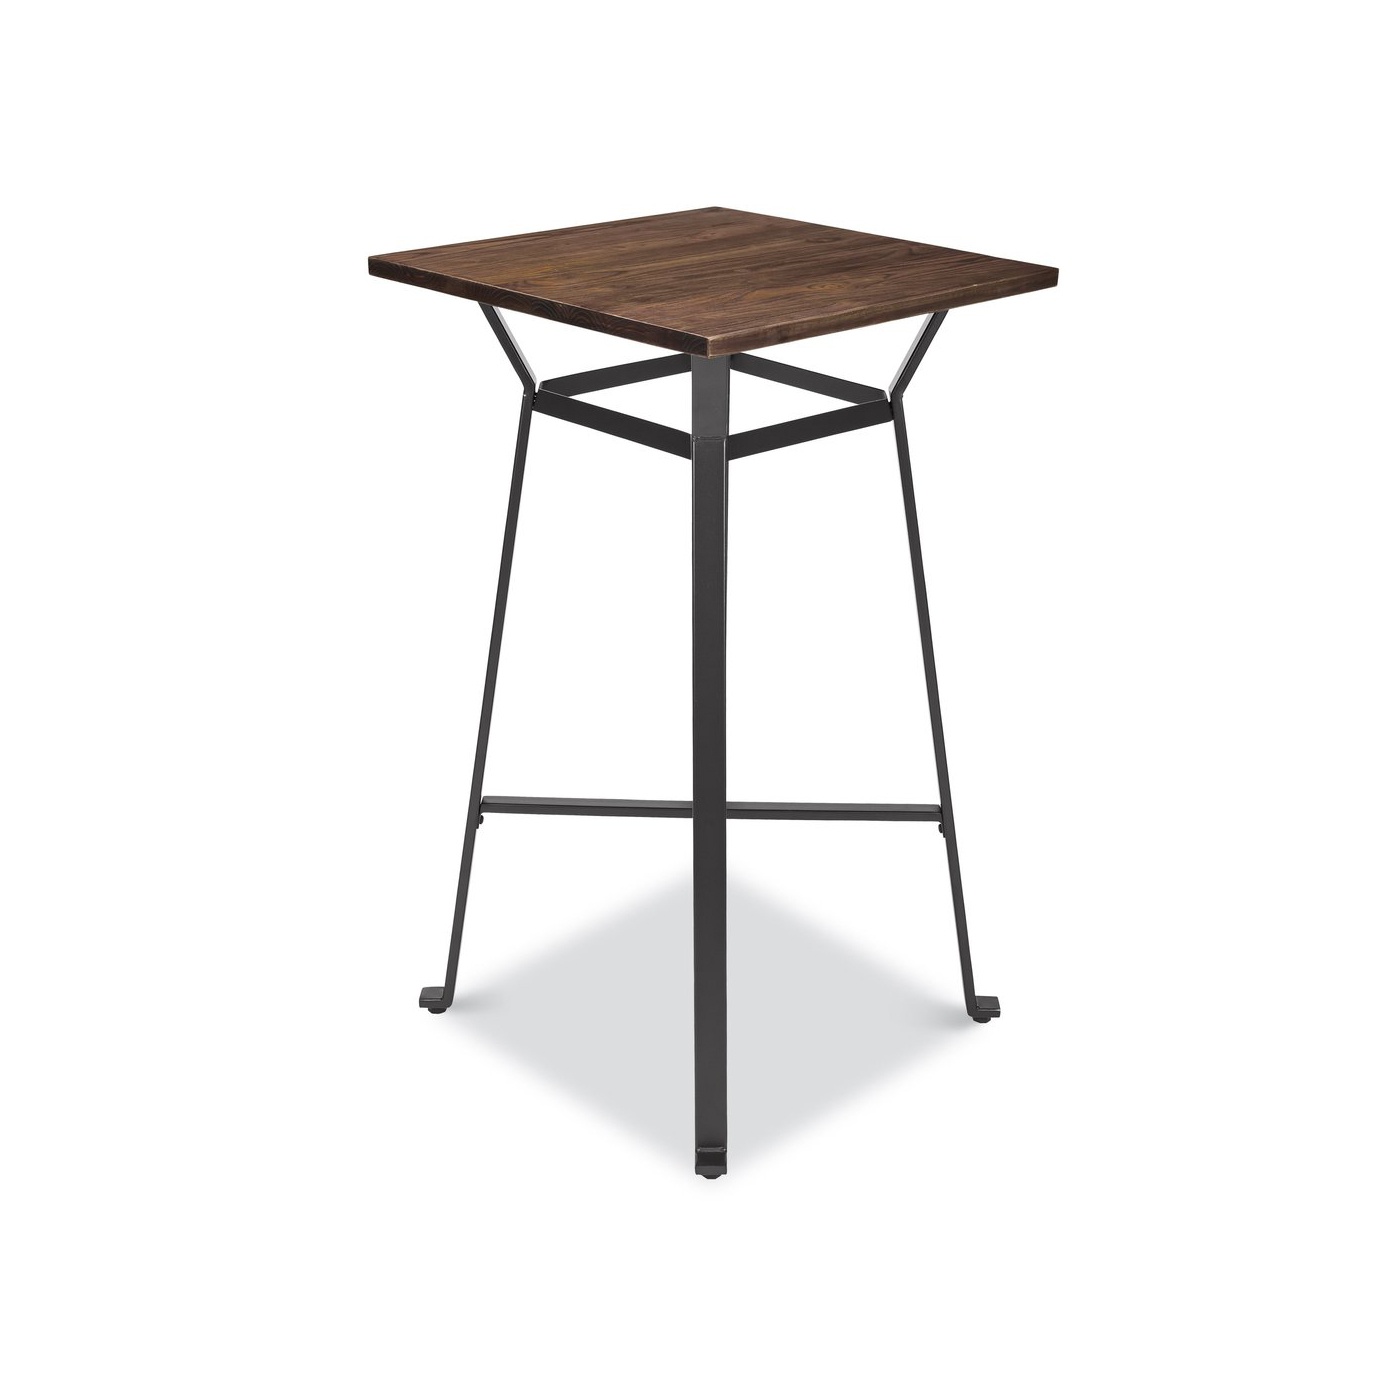 Sonora Bar Table | Event Trade Show Furniture Rental | FormDecor